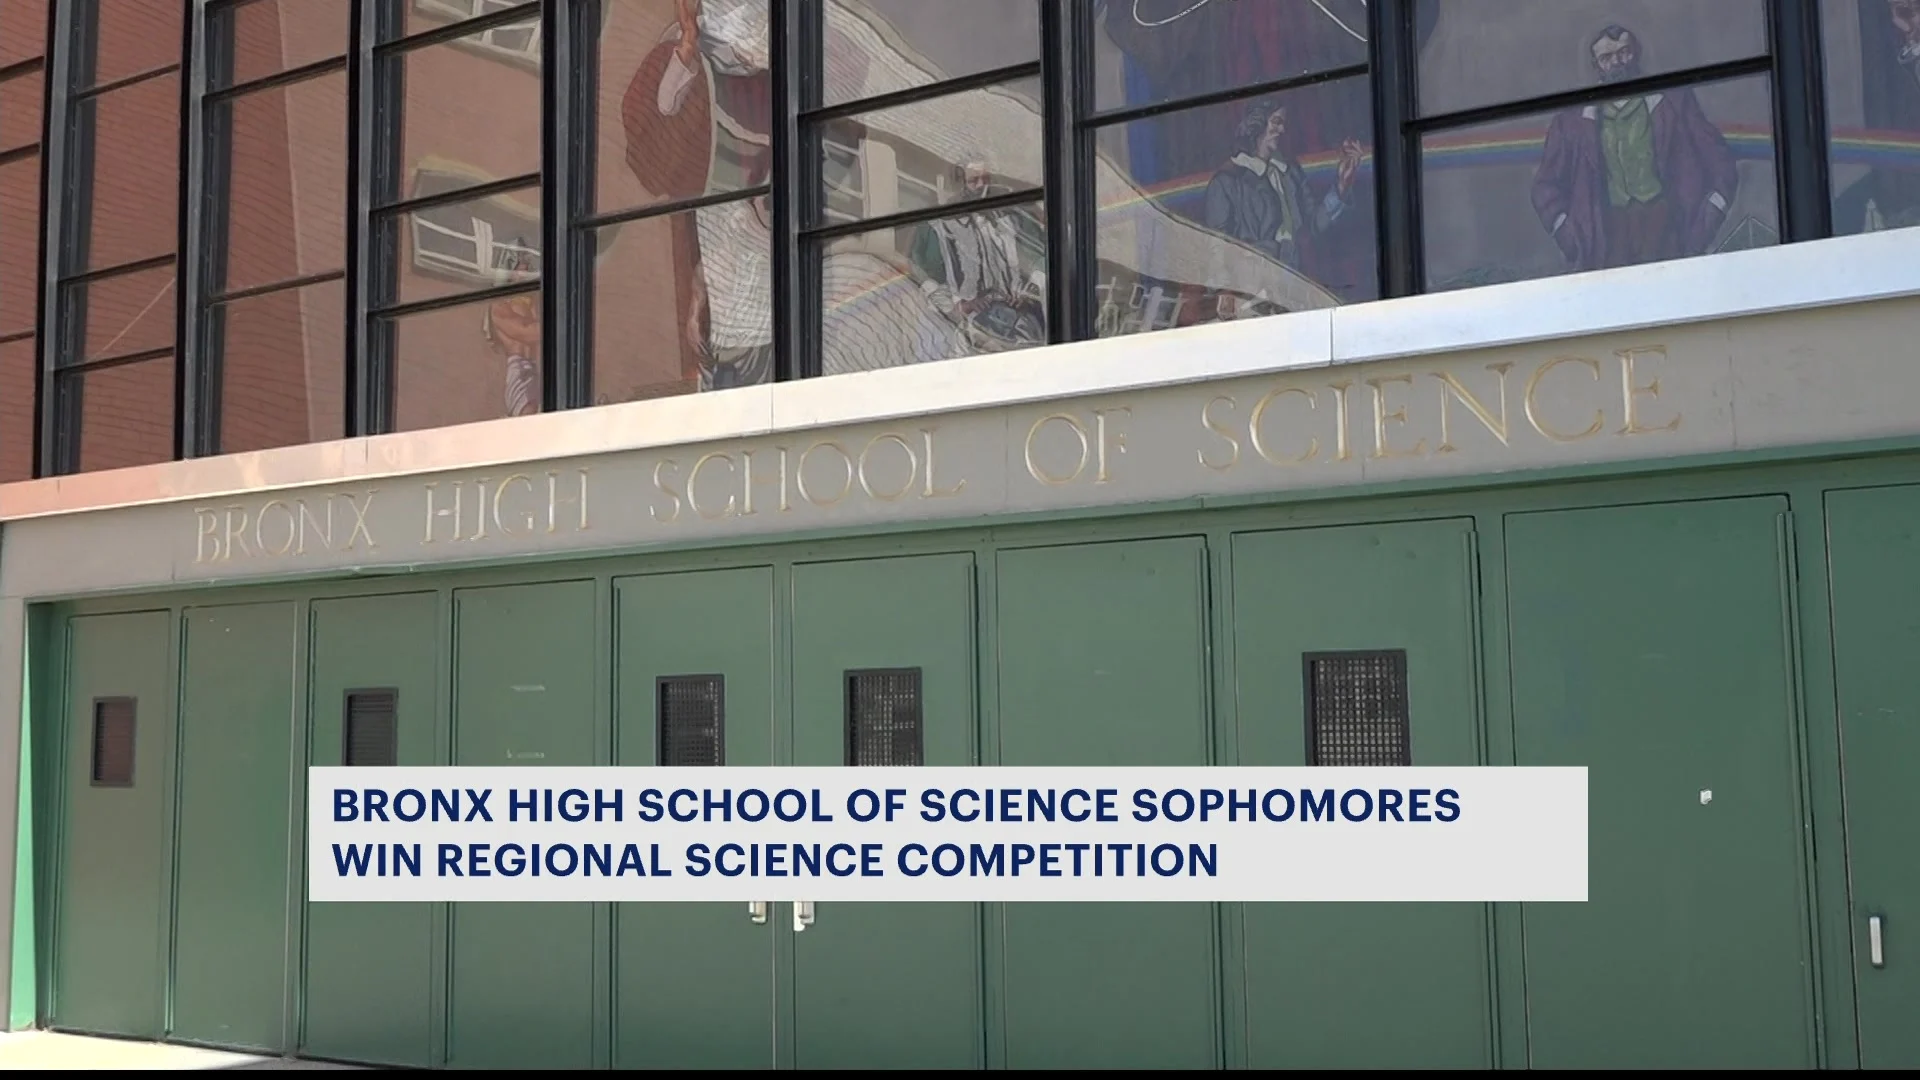 The trio from Bronx High School of Science takes home top prize at regional science competition